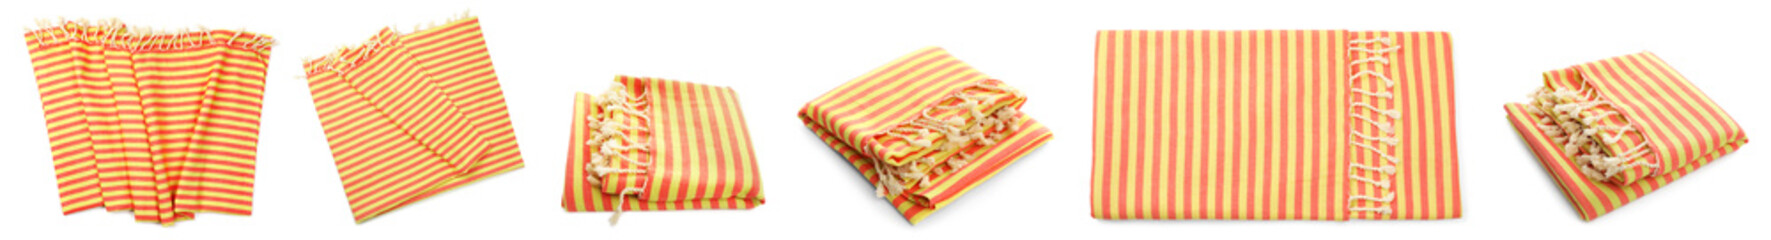 Set with striped beach towels on white background. Banner design